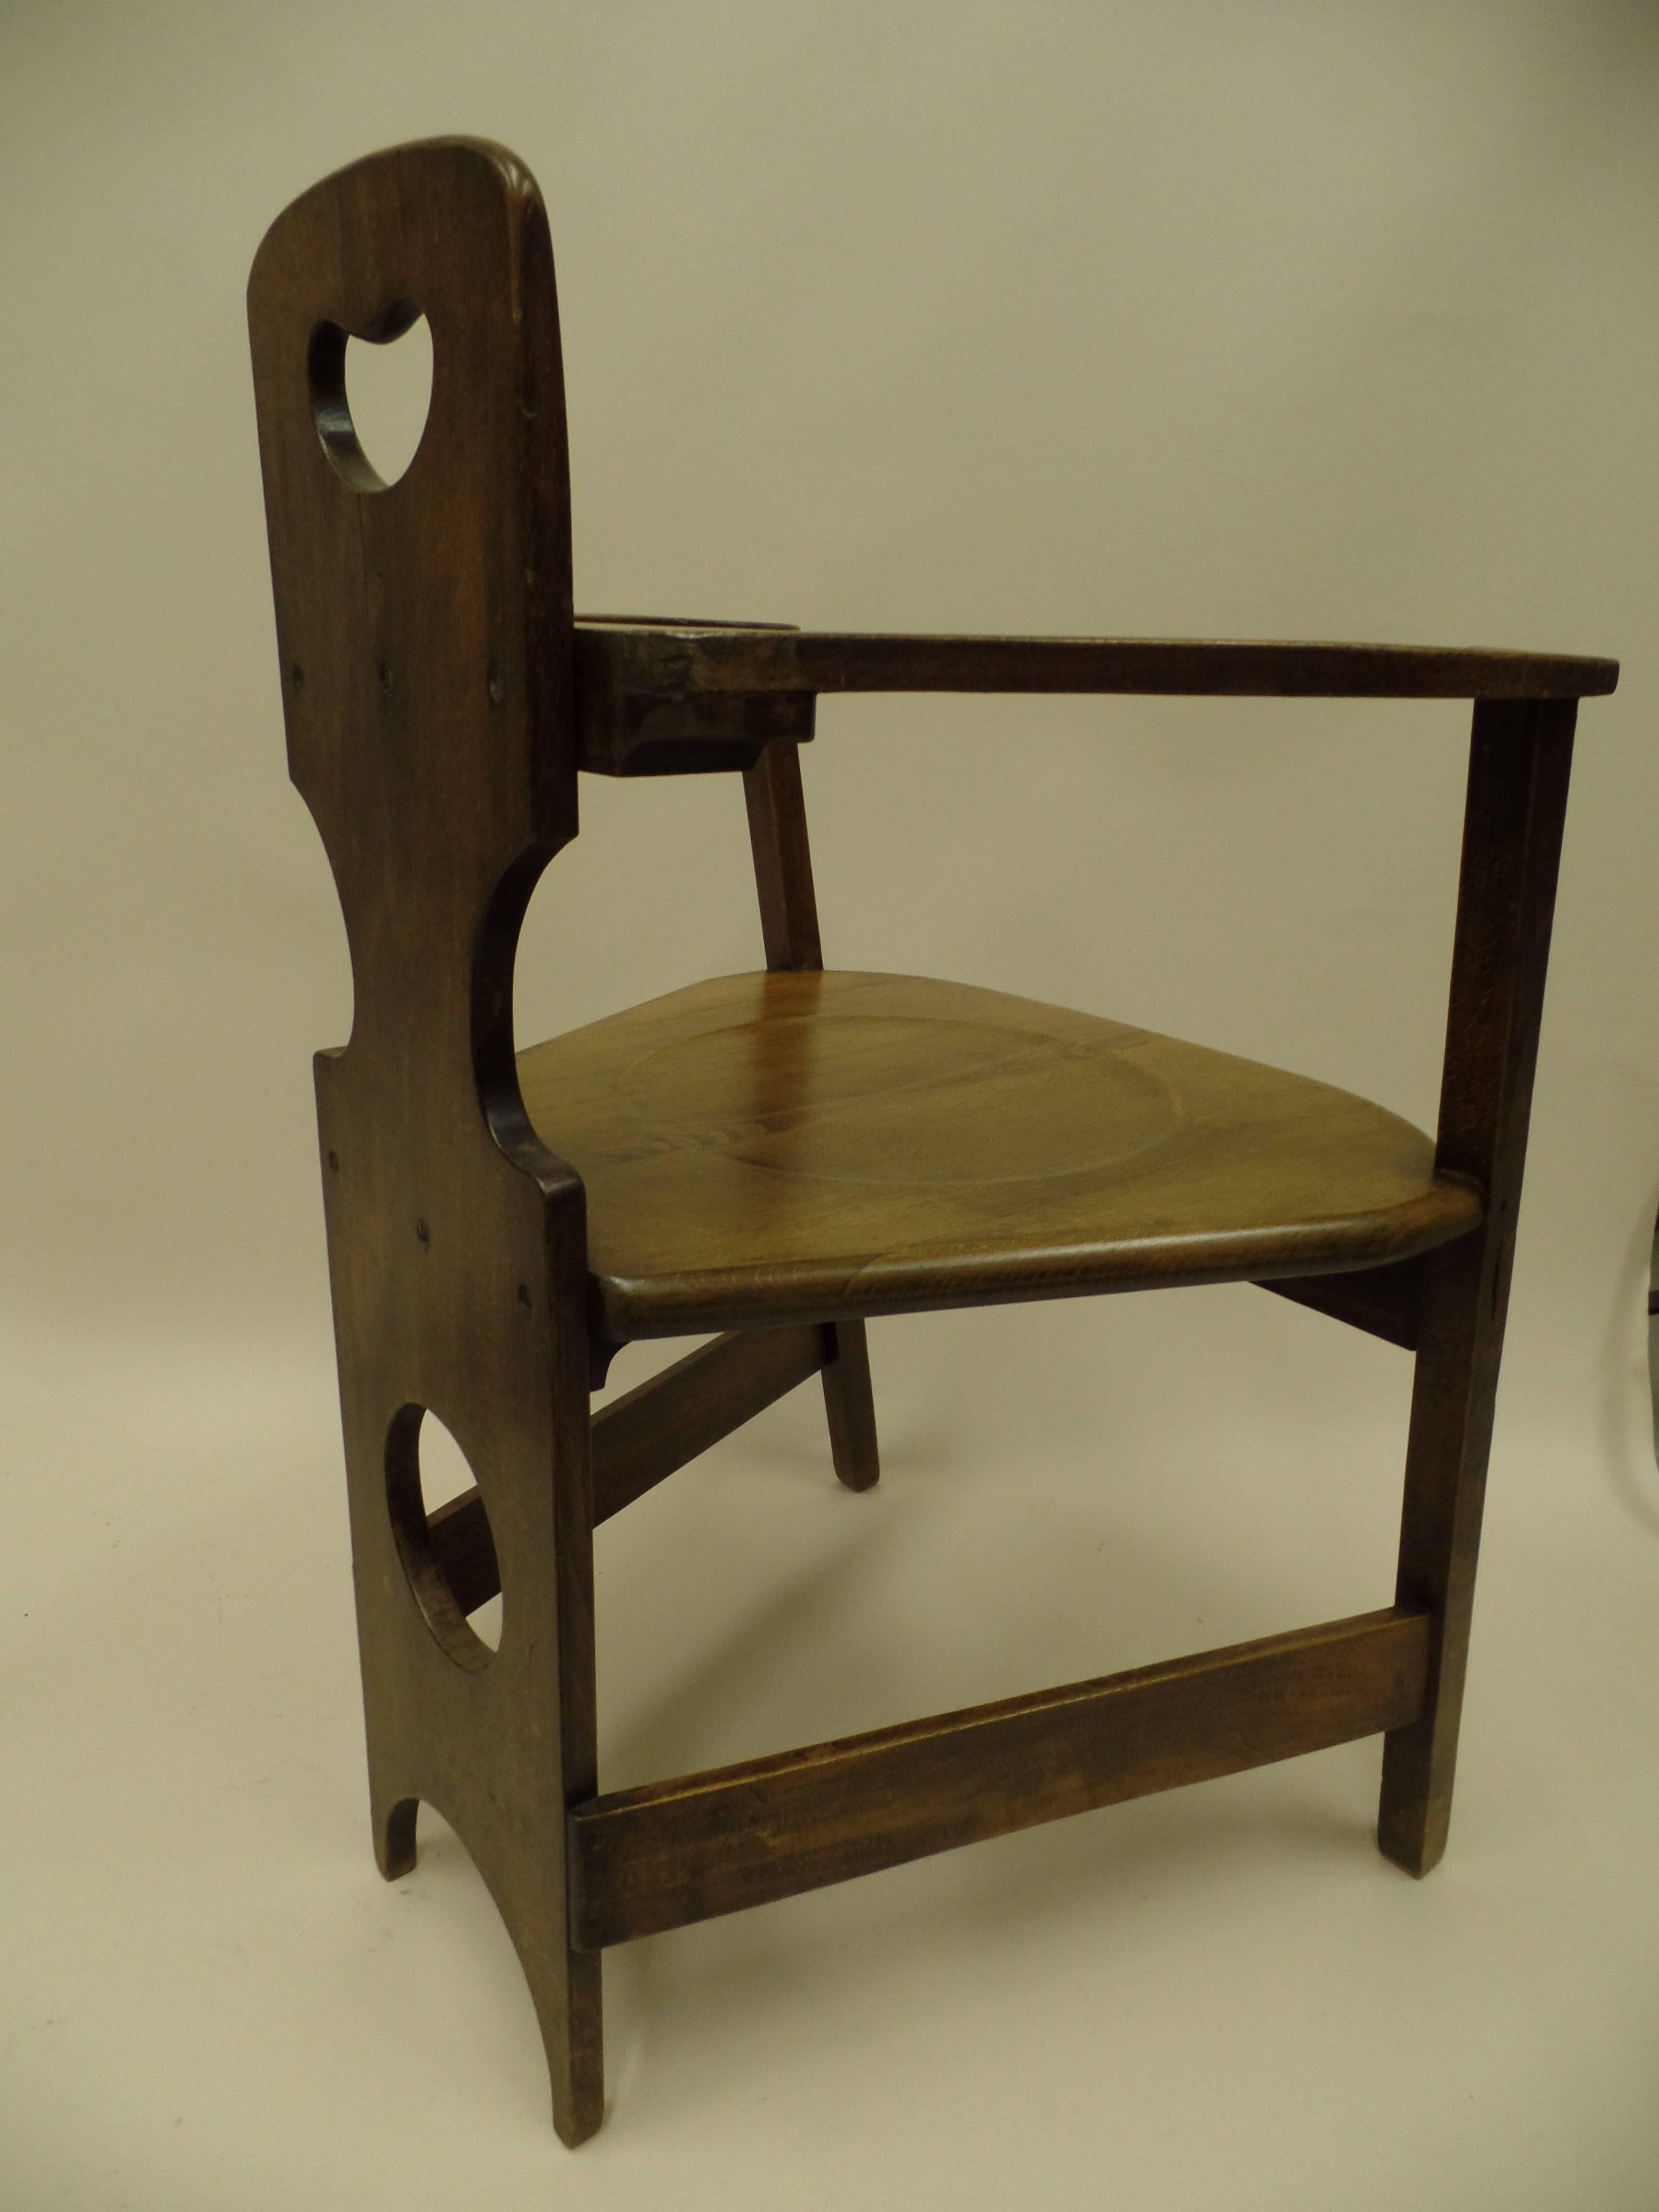 German A Rare and Important Chair in Furniture History by Richard Riemerschmid